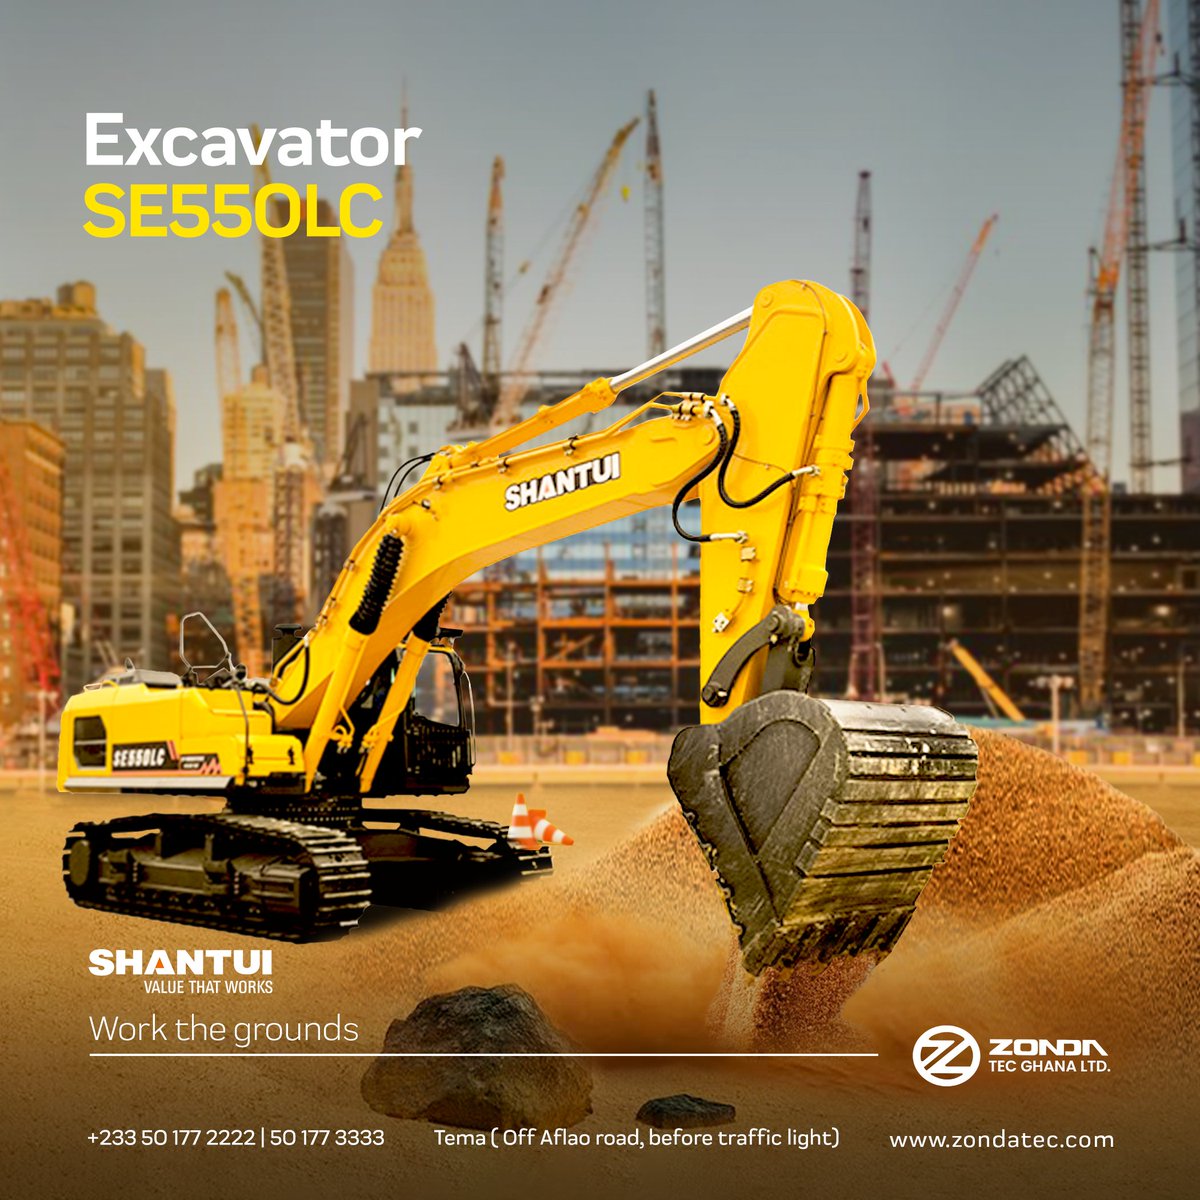 Put extra work on the ground, and dig deeper with Shantui excavators. 
#digdeeper #Shantui #machinery #machine #construction #constructionequipment #constructionlife #constructionsite